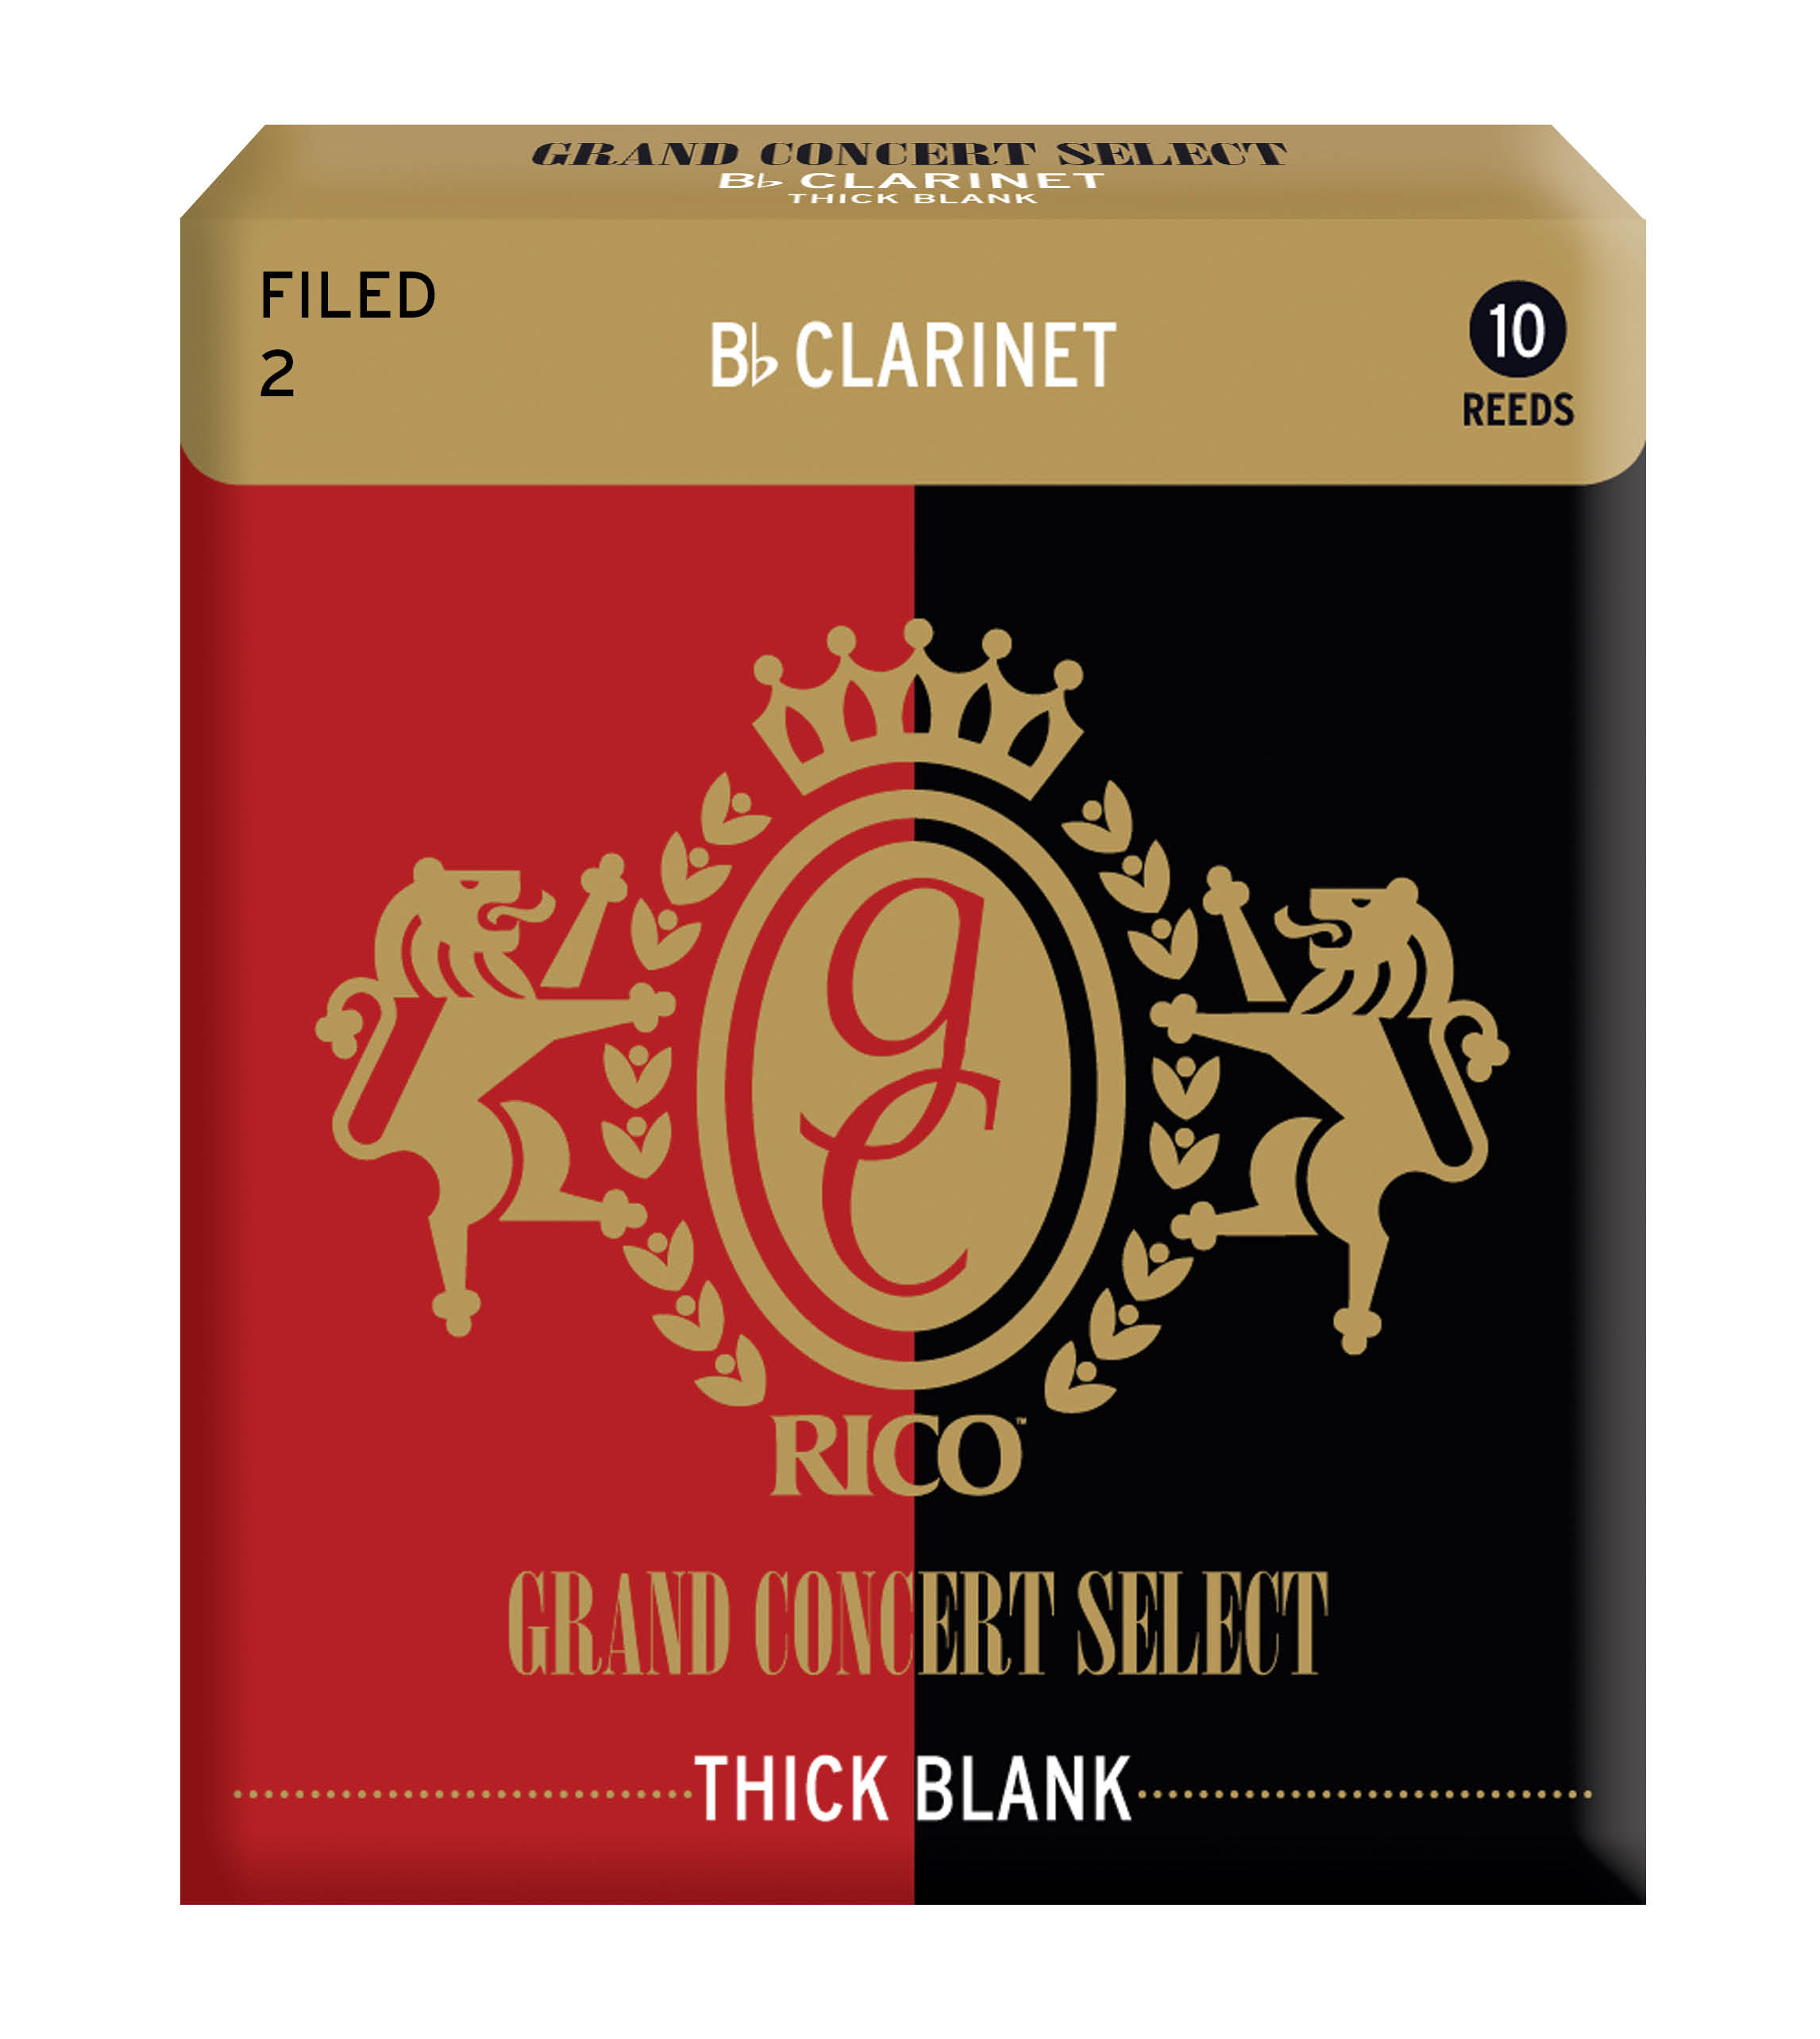 D'Addario Grand Concert Select Thick Blank Bb Clarinet Reeds, Filed, Strength 2.0, 10 Pack